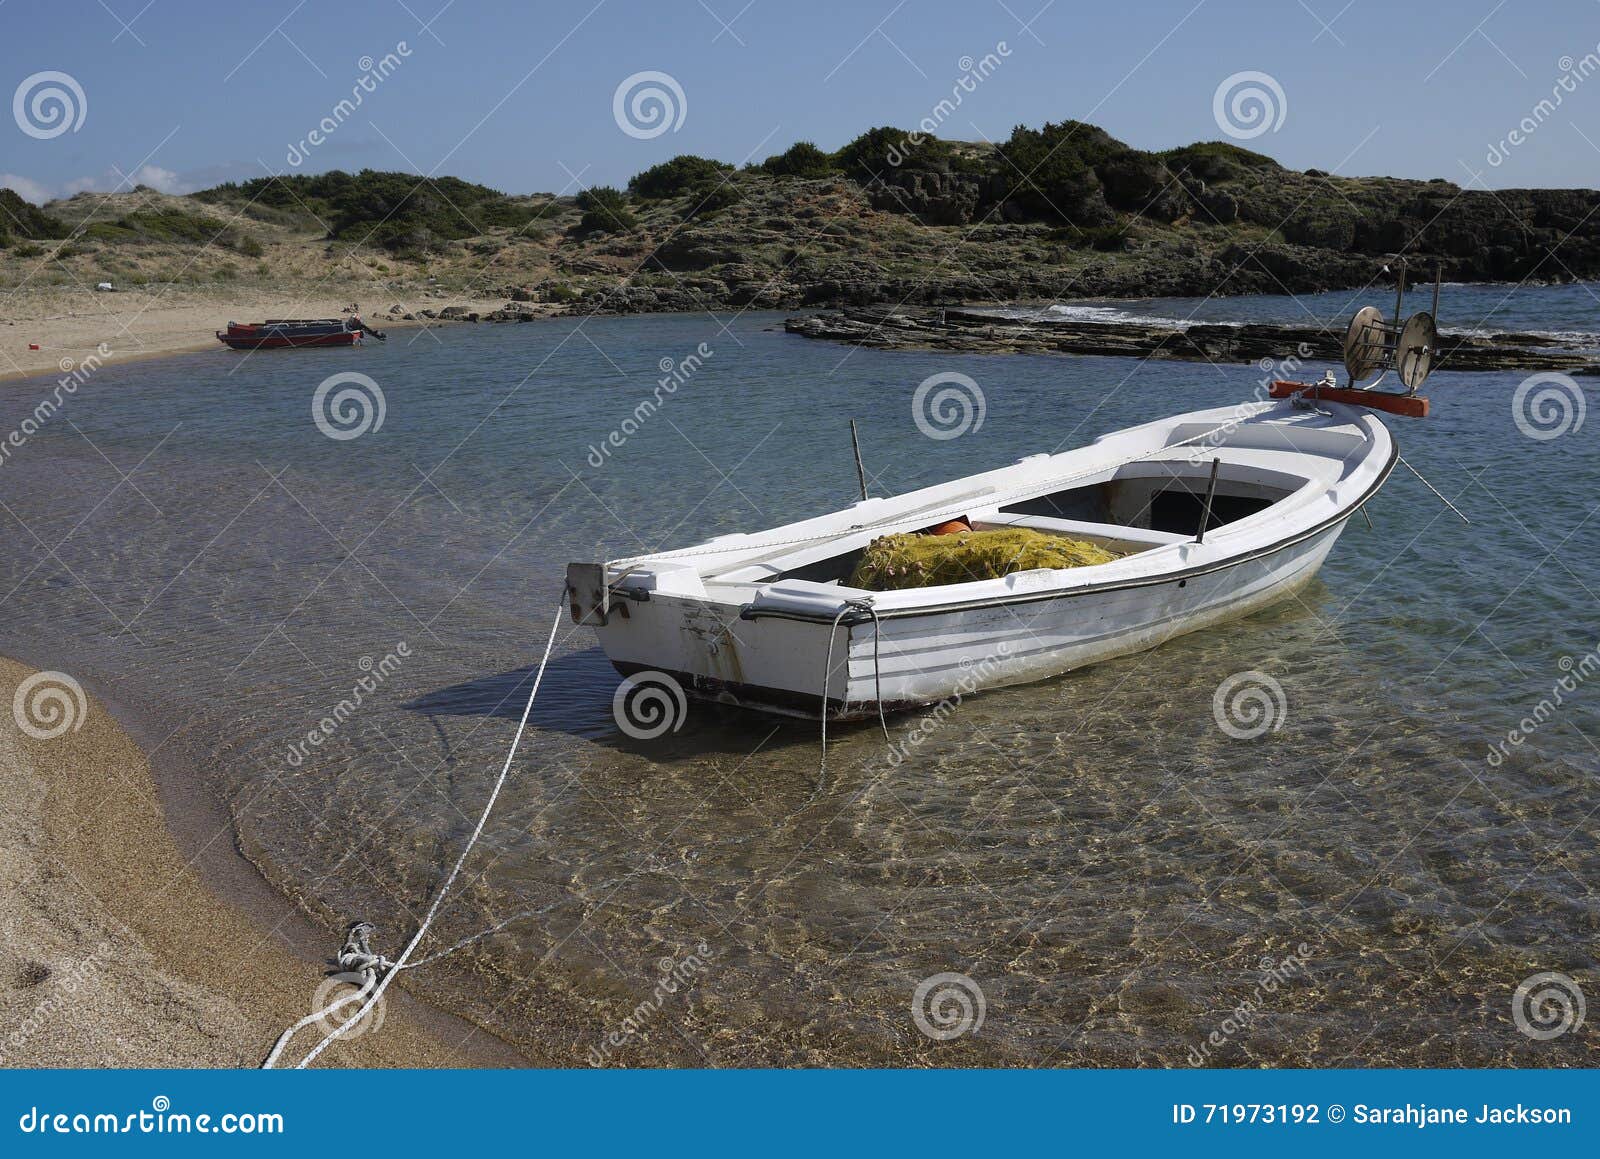 greek fishing boat in natural harbour stock photo - image